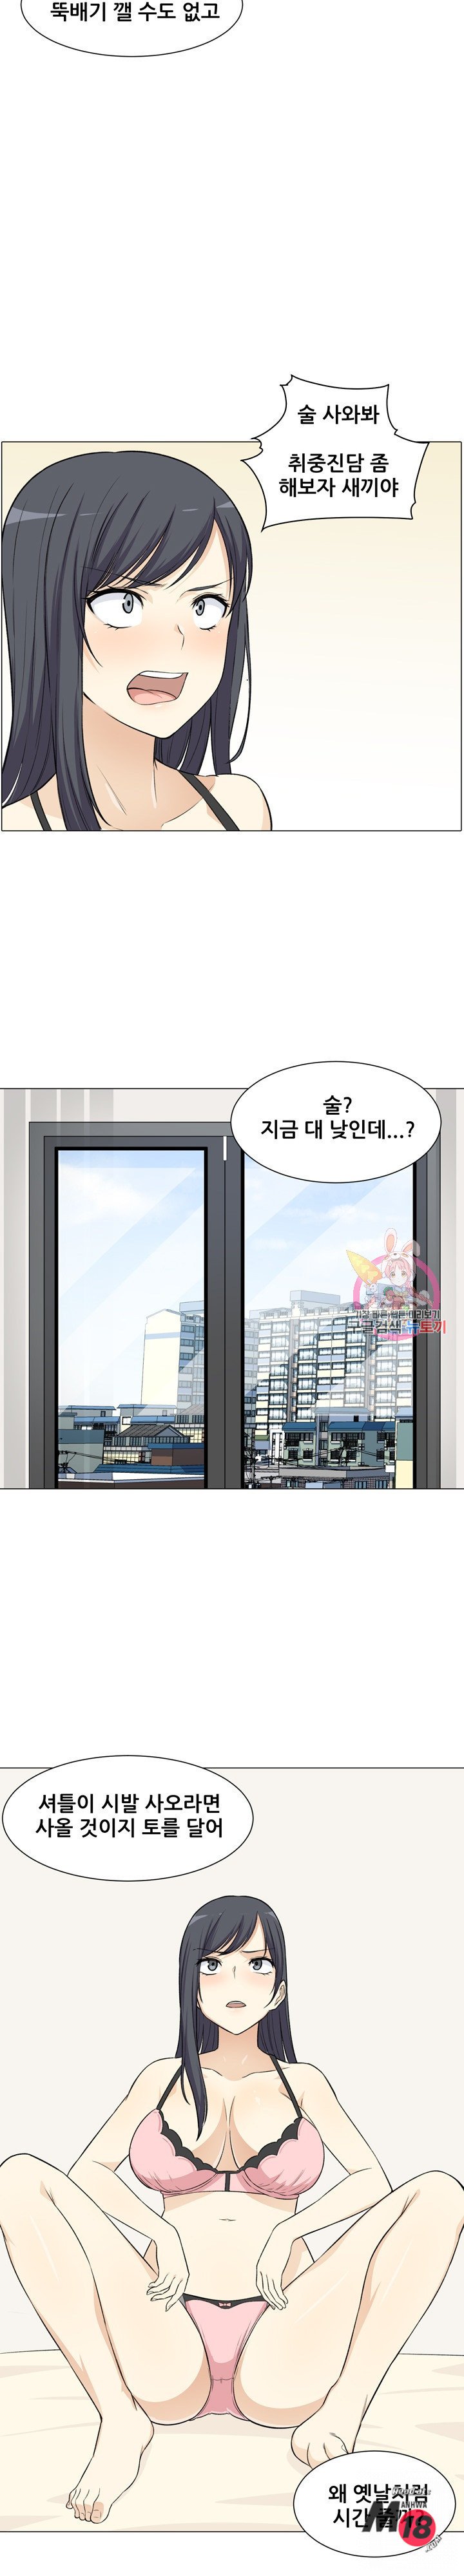 the-ark-is-me-raw-chap-21-23